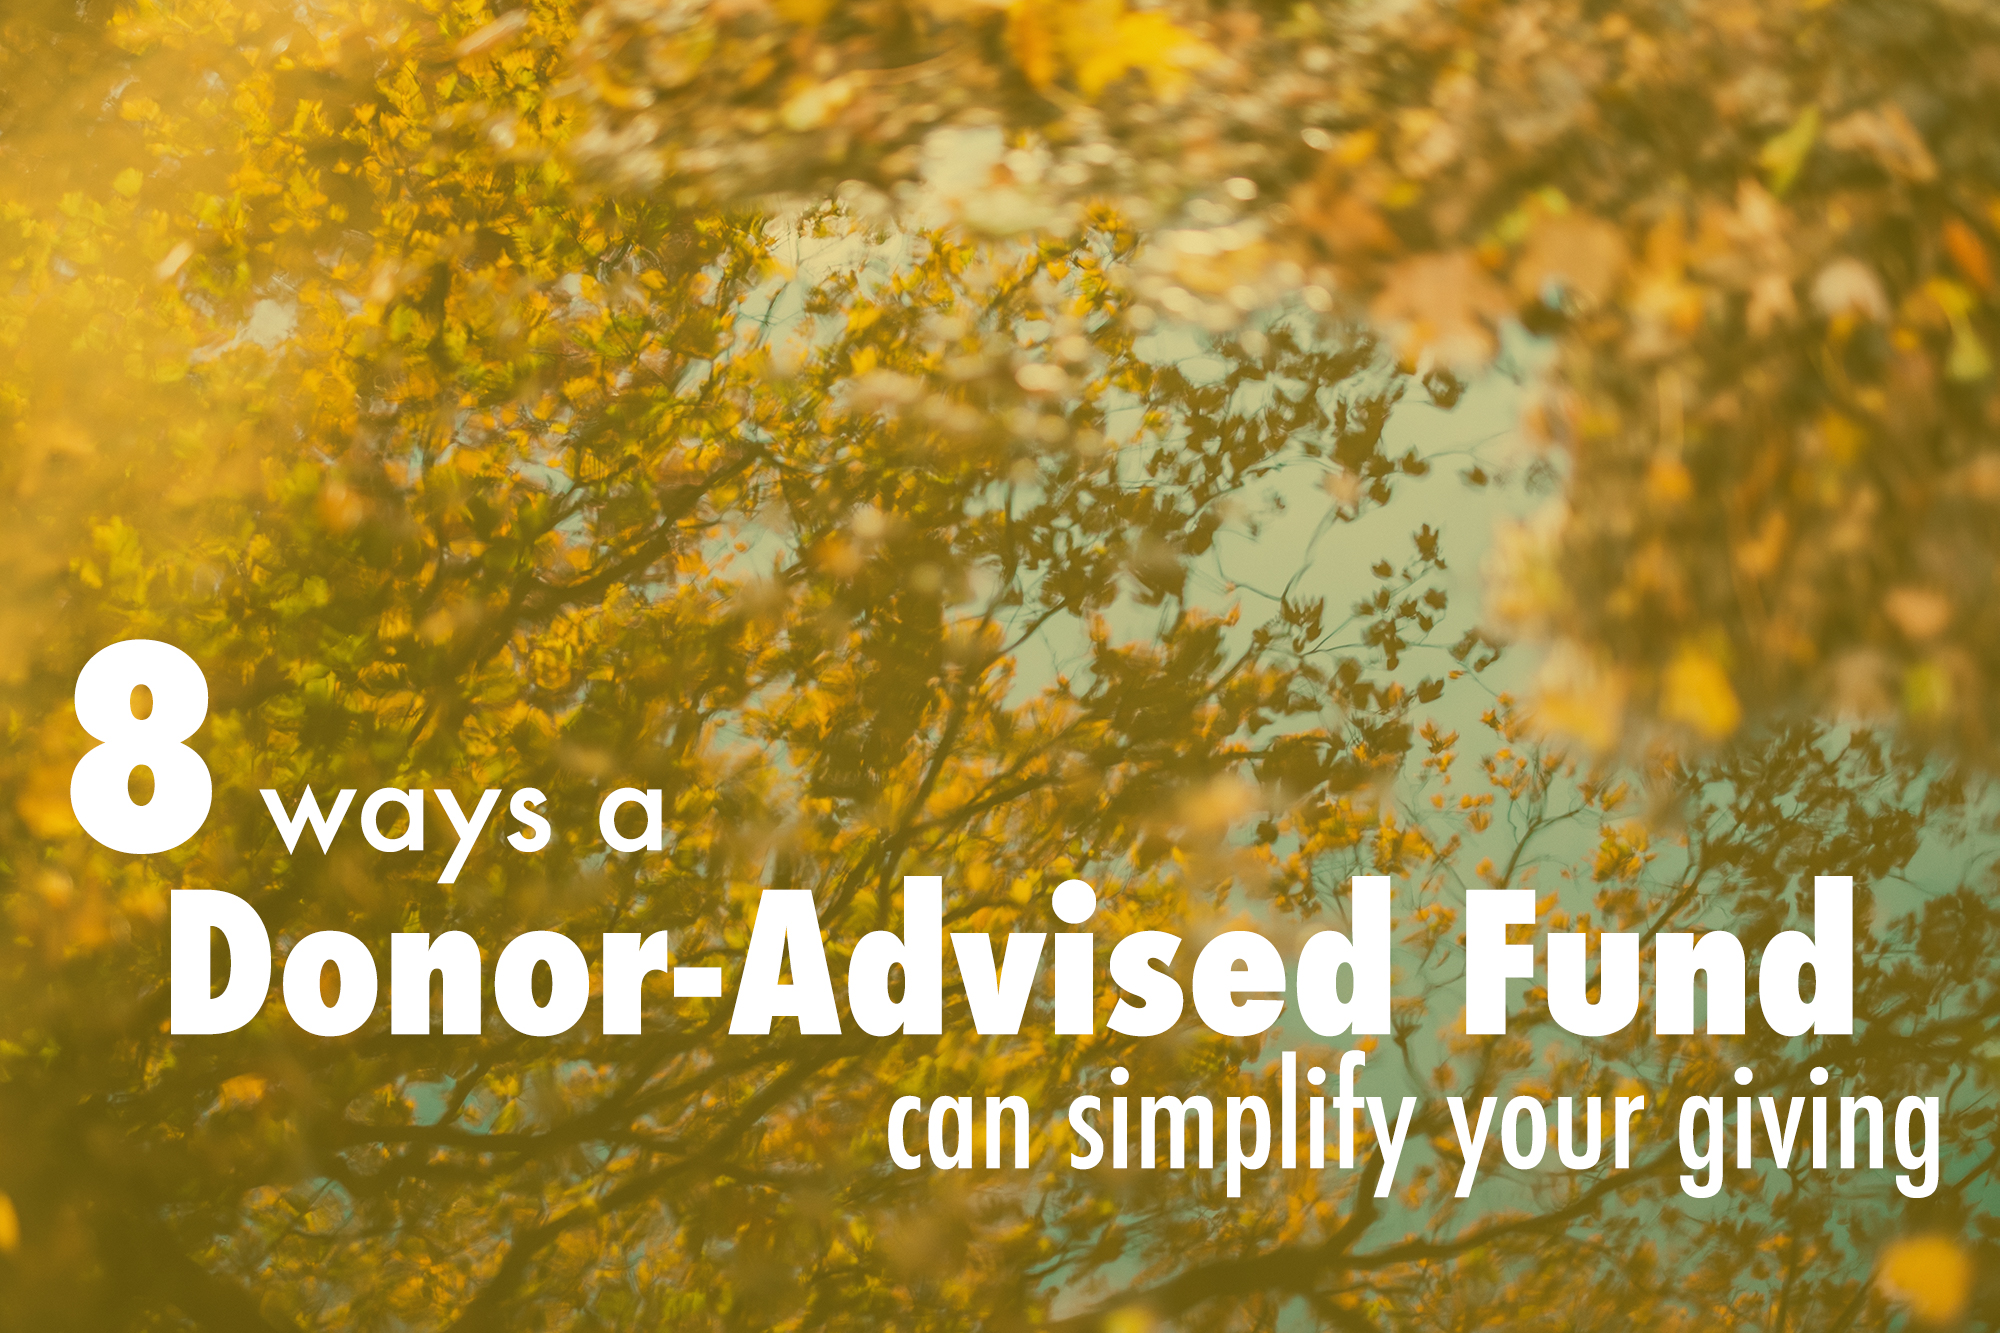 Eight ways a Donor-Advised Fund can simplify your giving